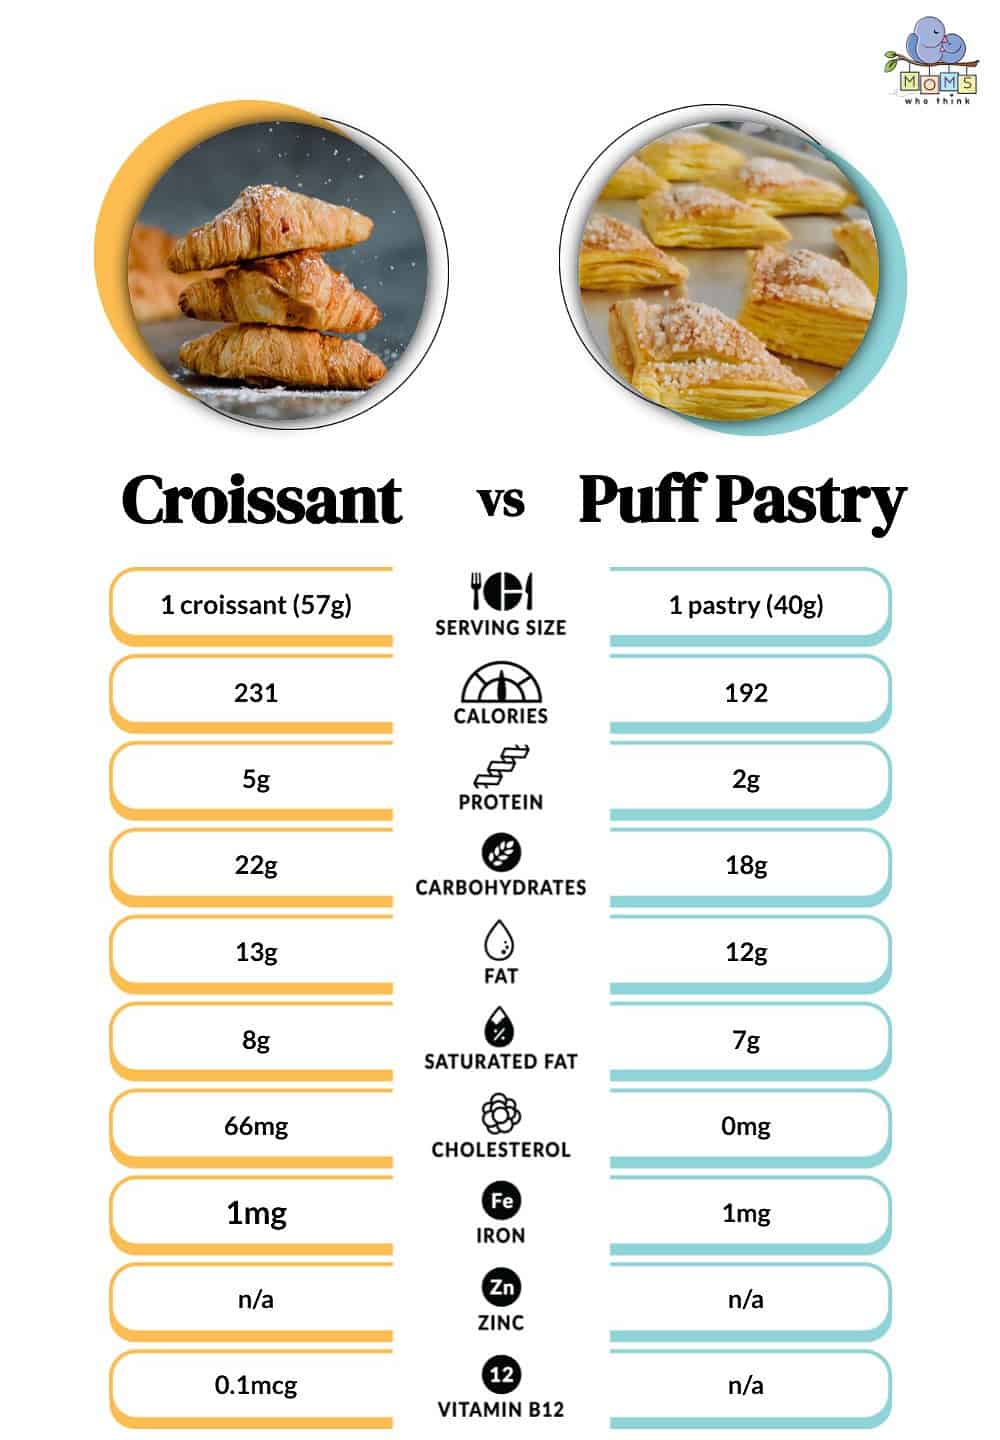 Croissant vs Puff Pastry Nutritional Facts